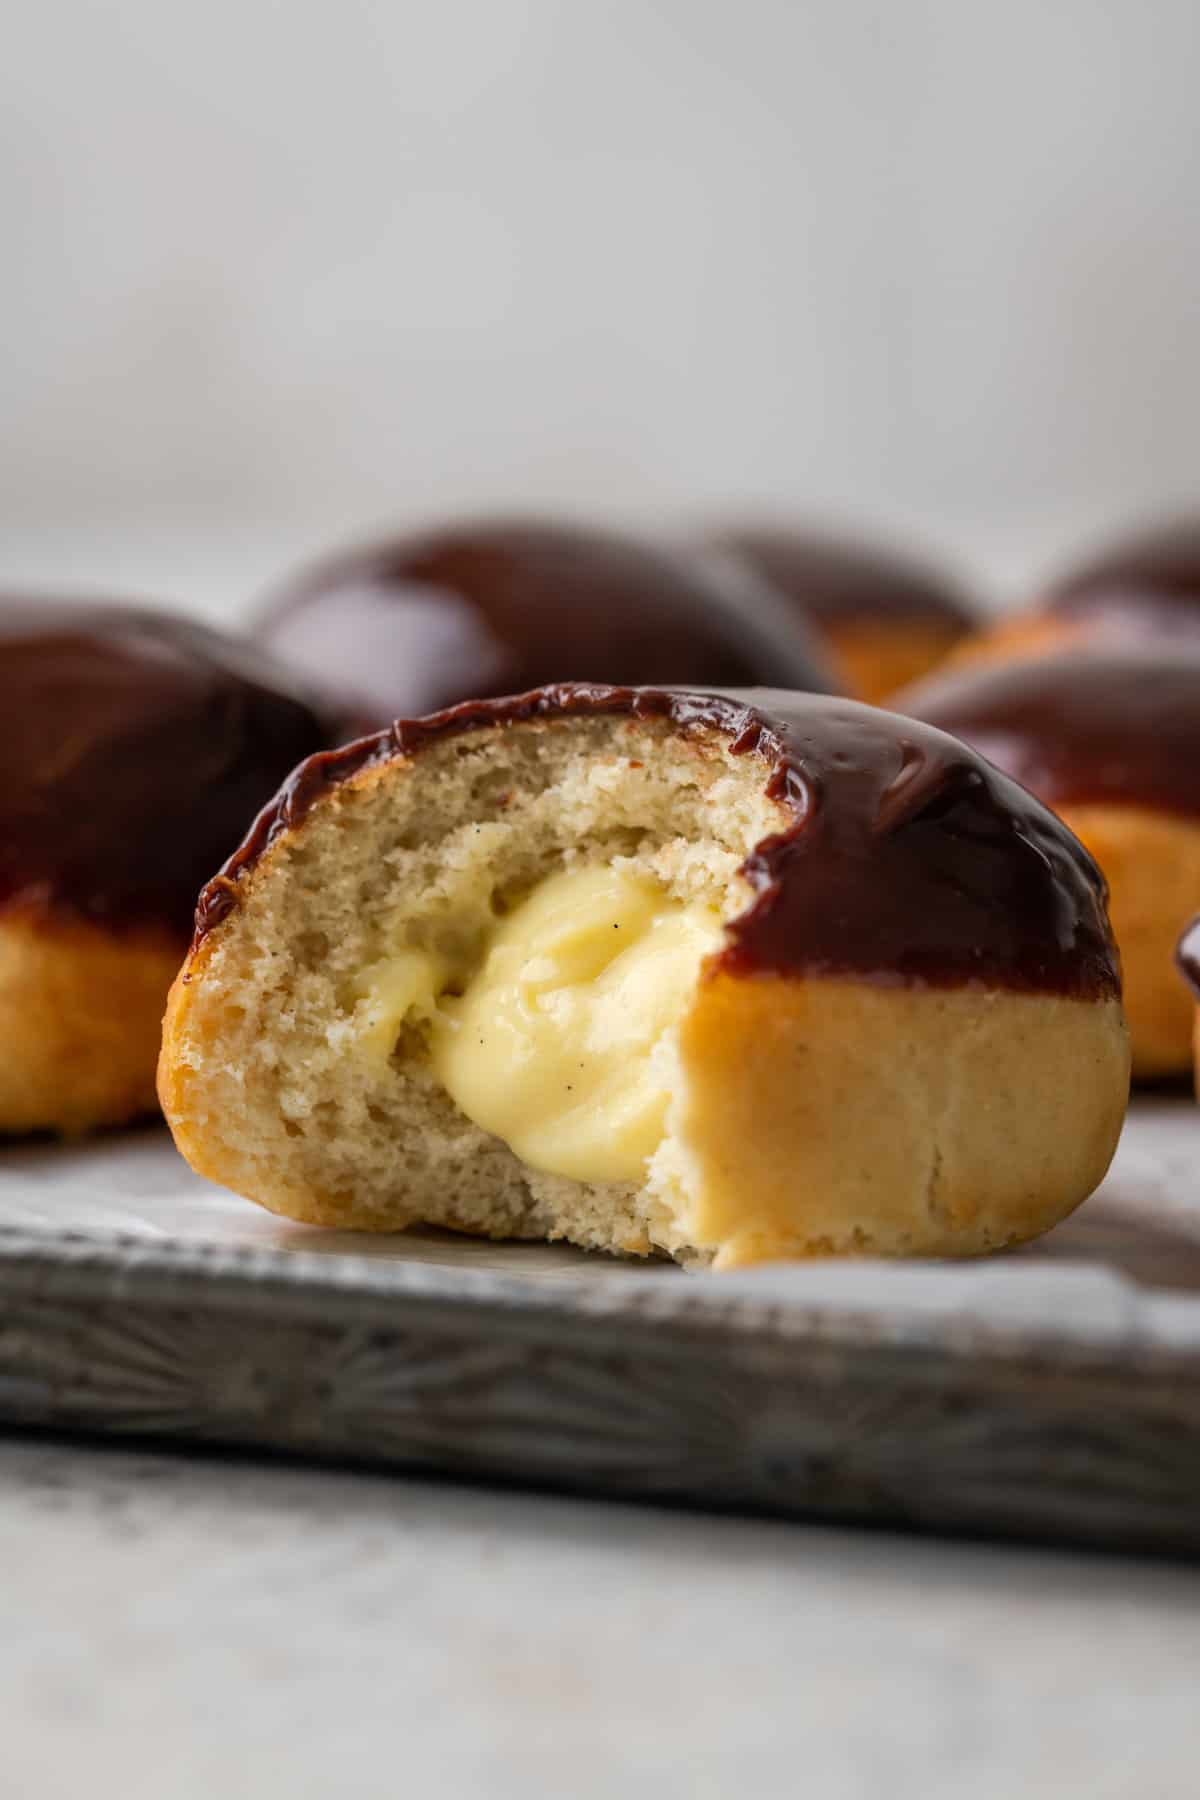 The interior of pastry cream is shown on a donut.